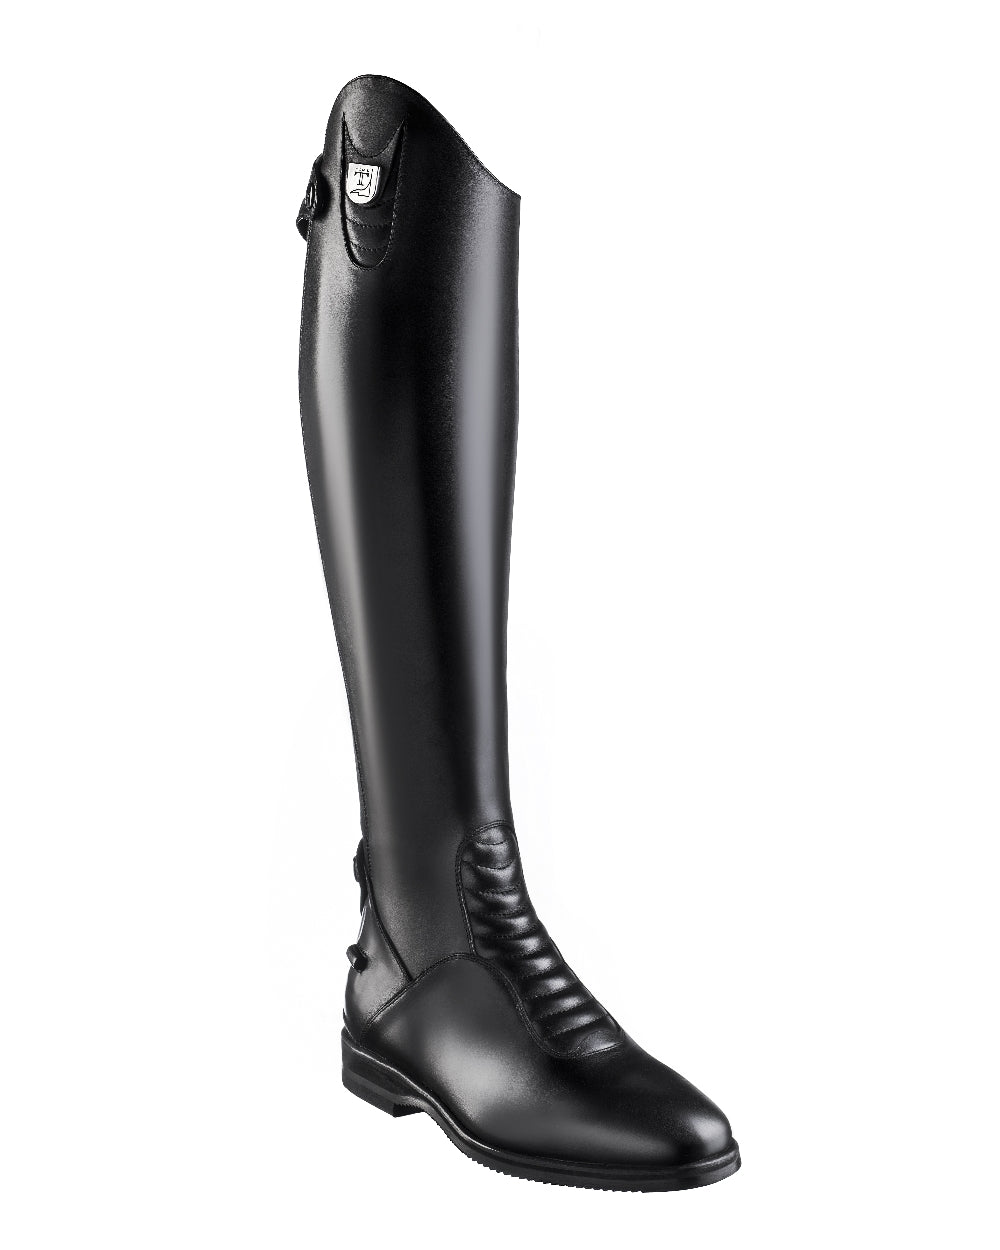 Tucci riding boots calf leather Harley black size 36